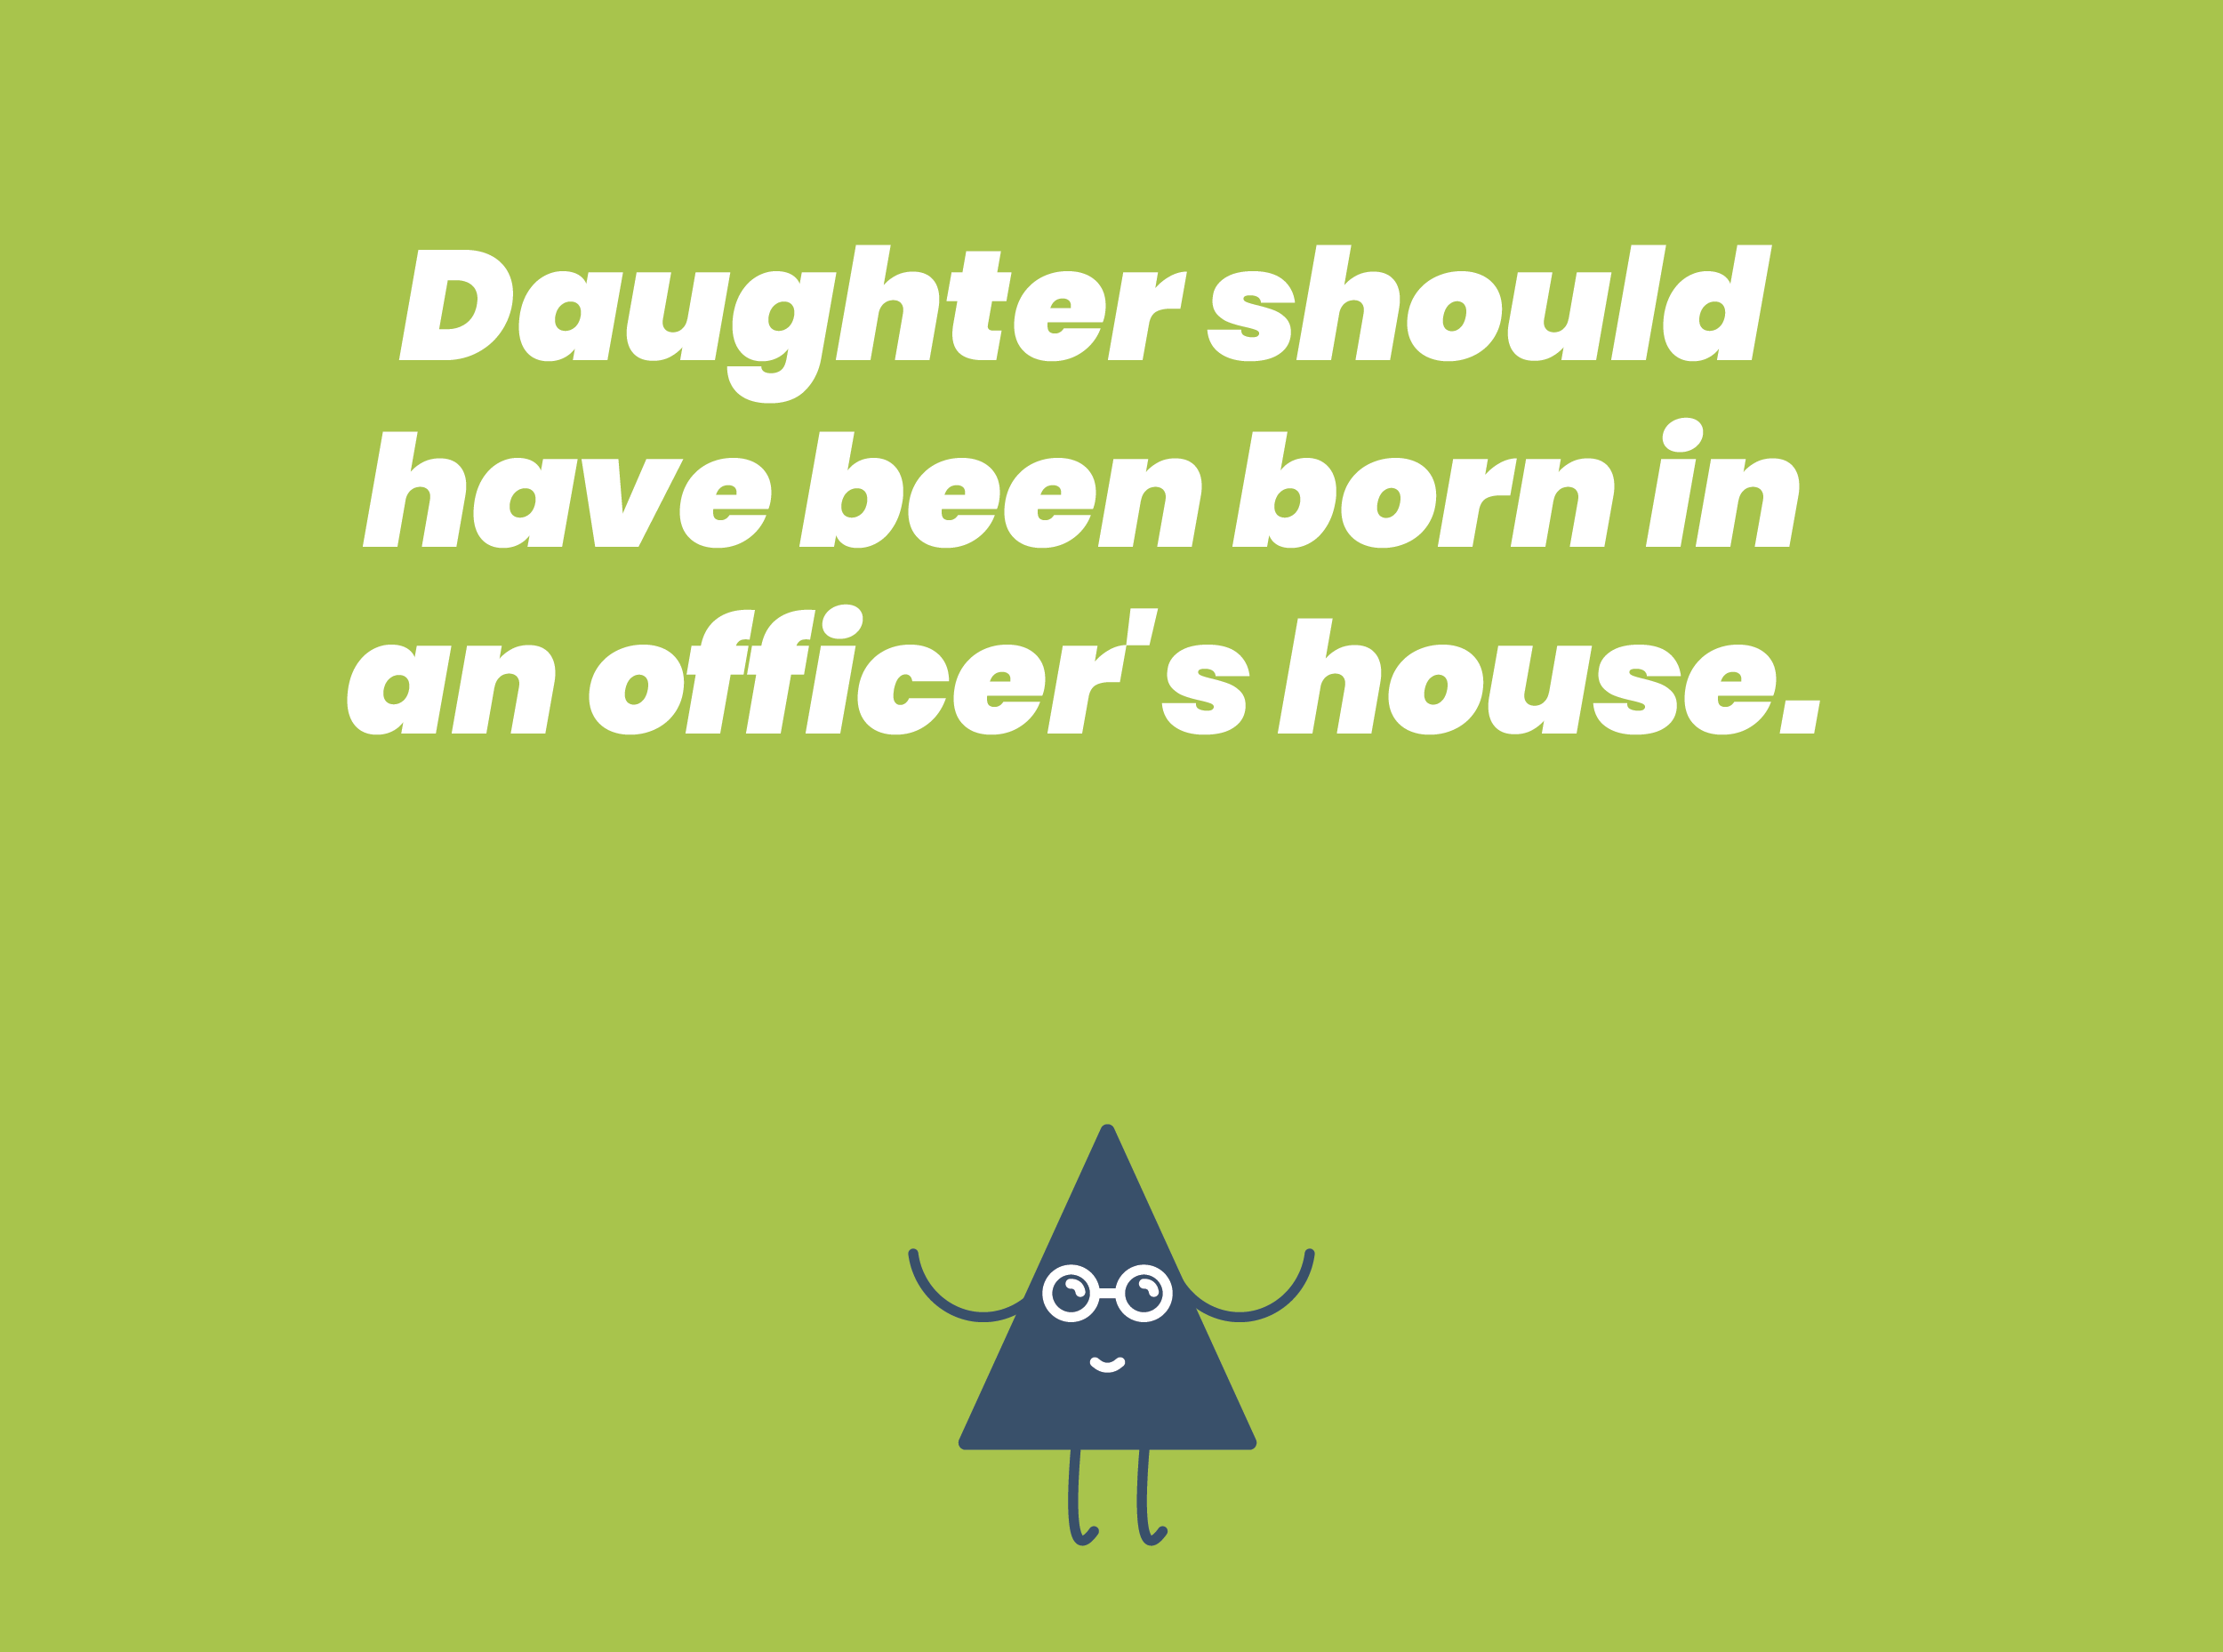 Daughter should have been born in an officer's house.